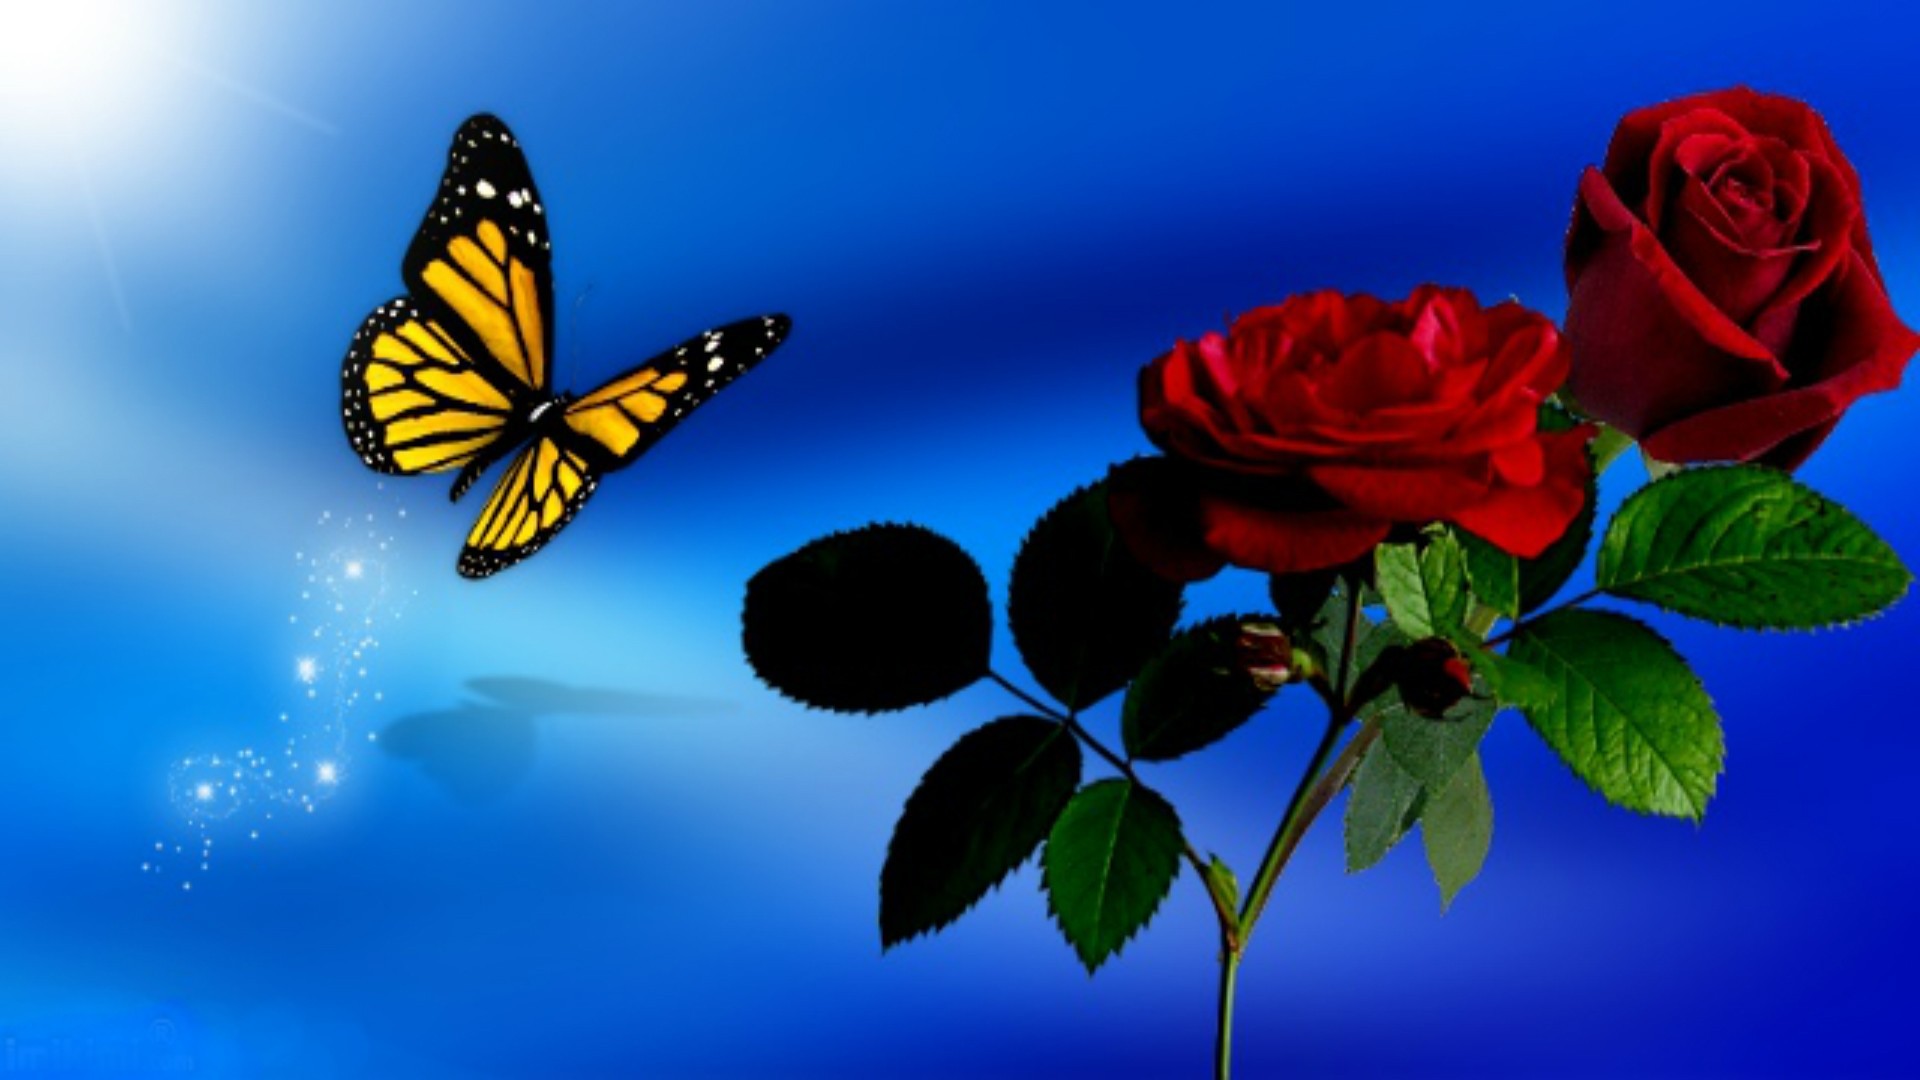 1920x1080, Butterfly Sky Spring Blue Roses Red Flowers - HD Wallpaper 